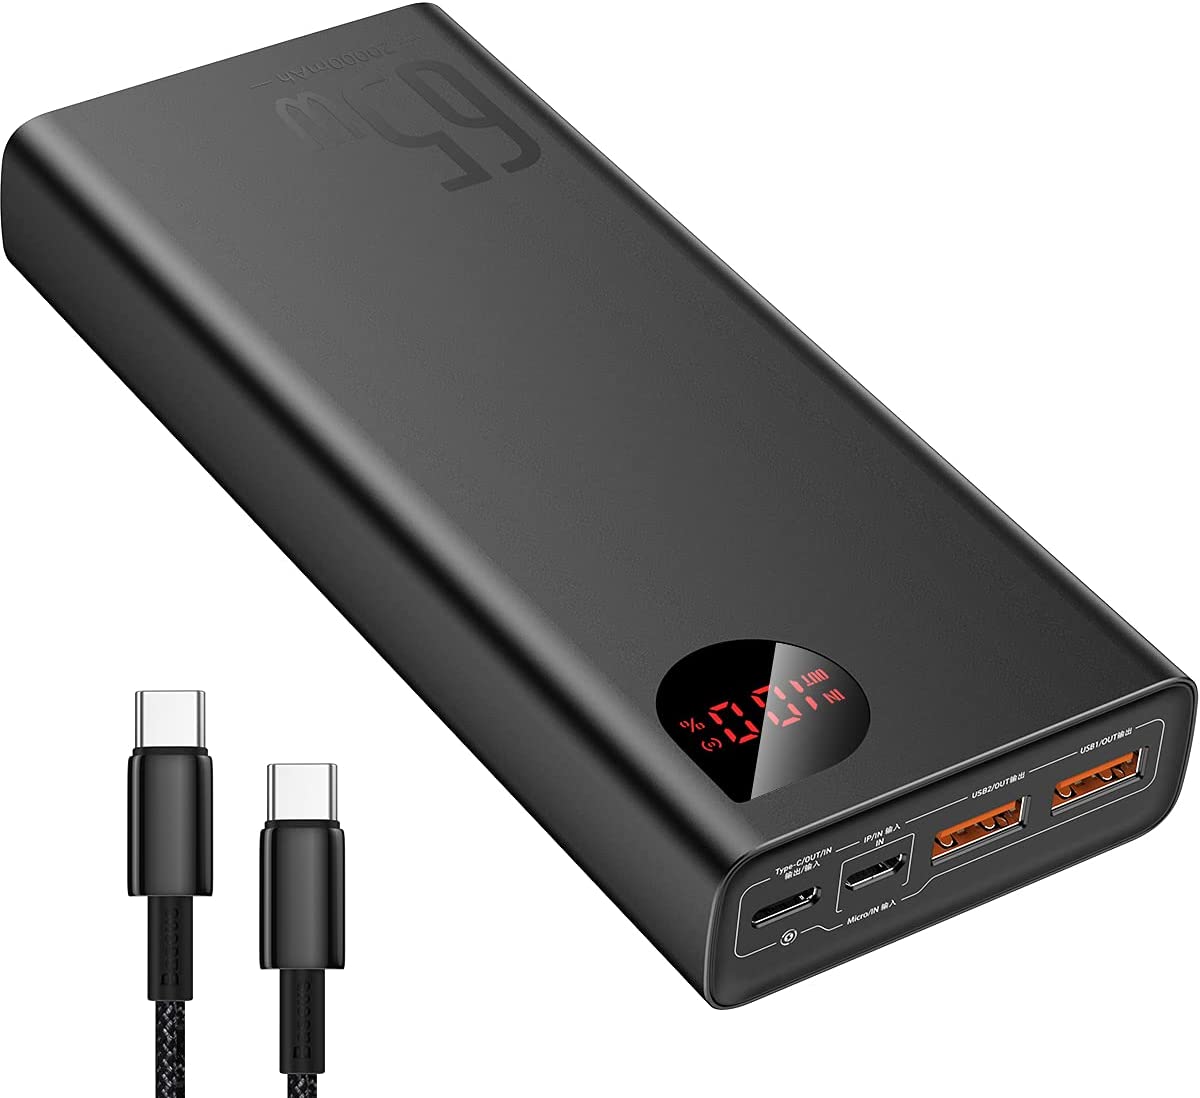 Profetie Zoeken Grillig Baseus 65 W USB-C power bank with real-time amp reading now on sale for $45  USD - NotebookCheck.net News